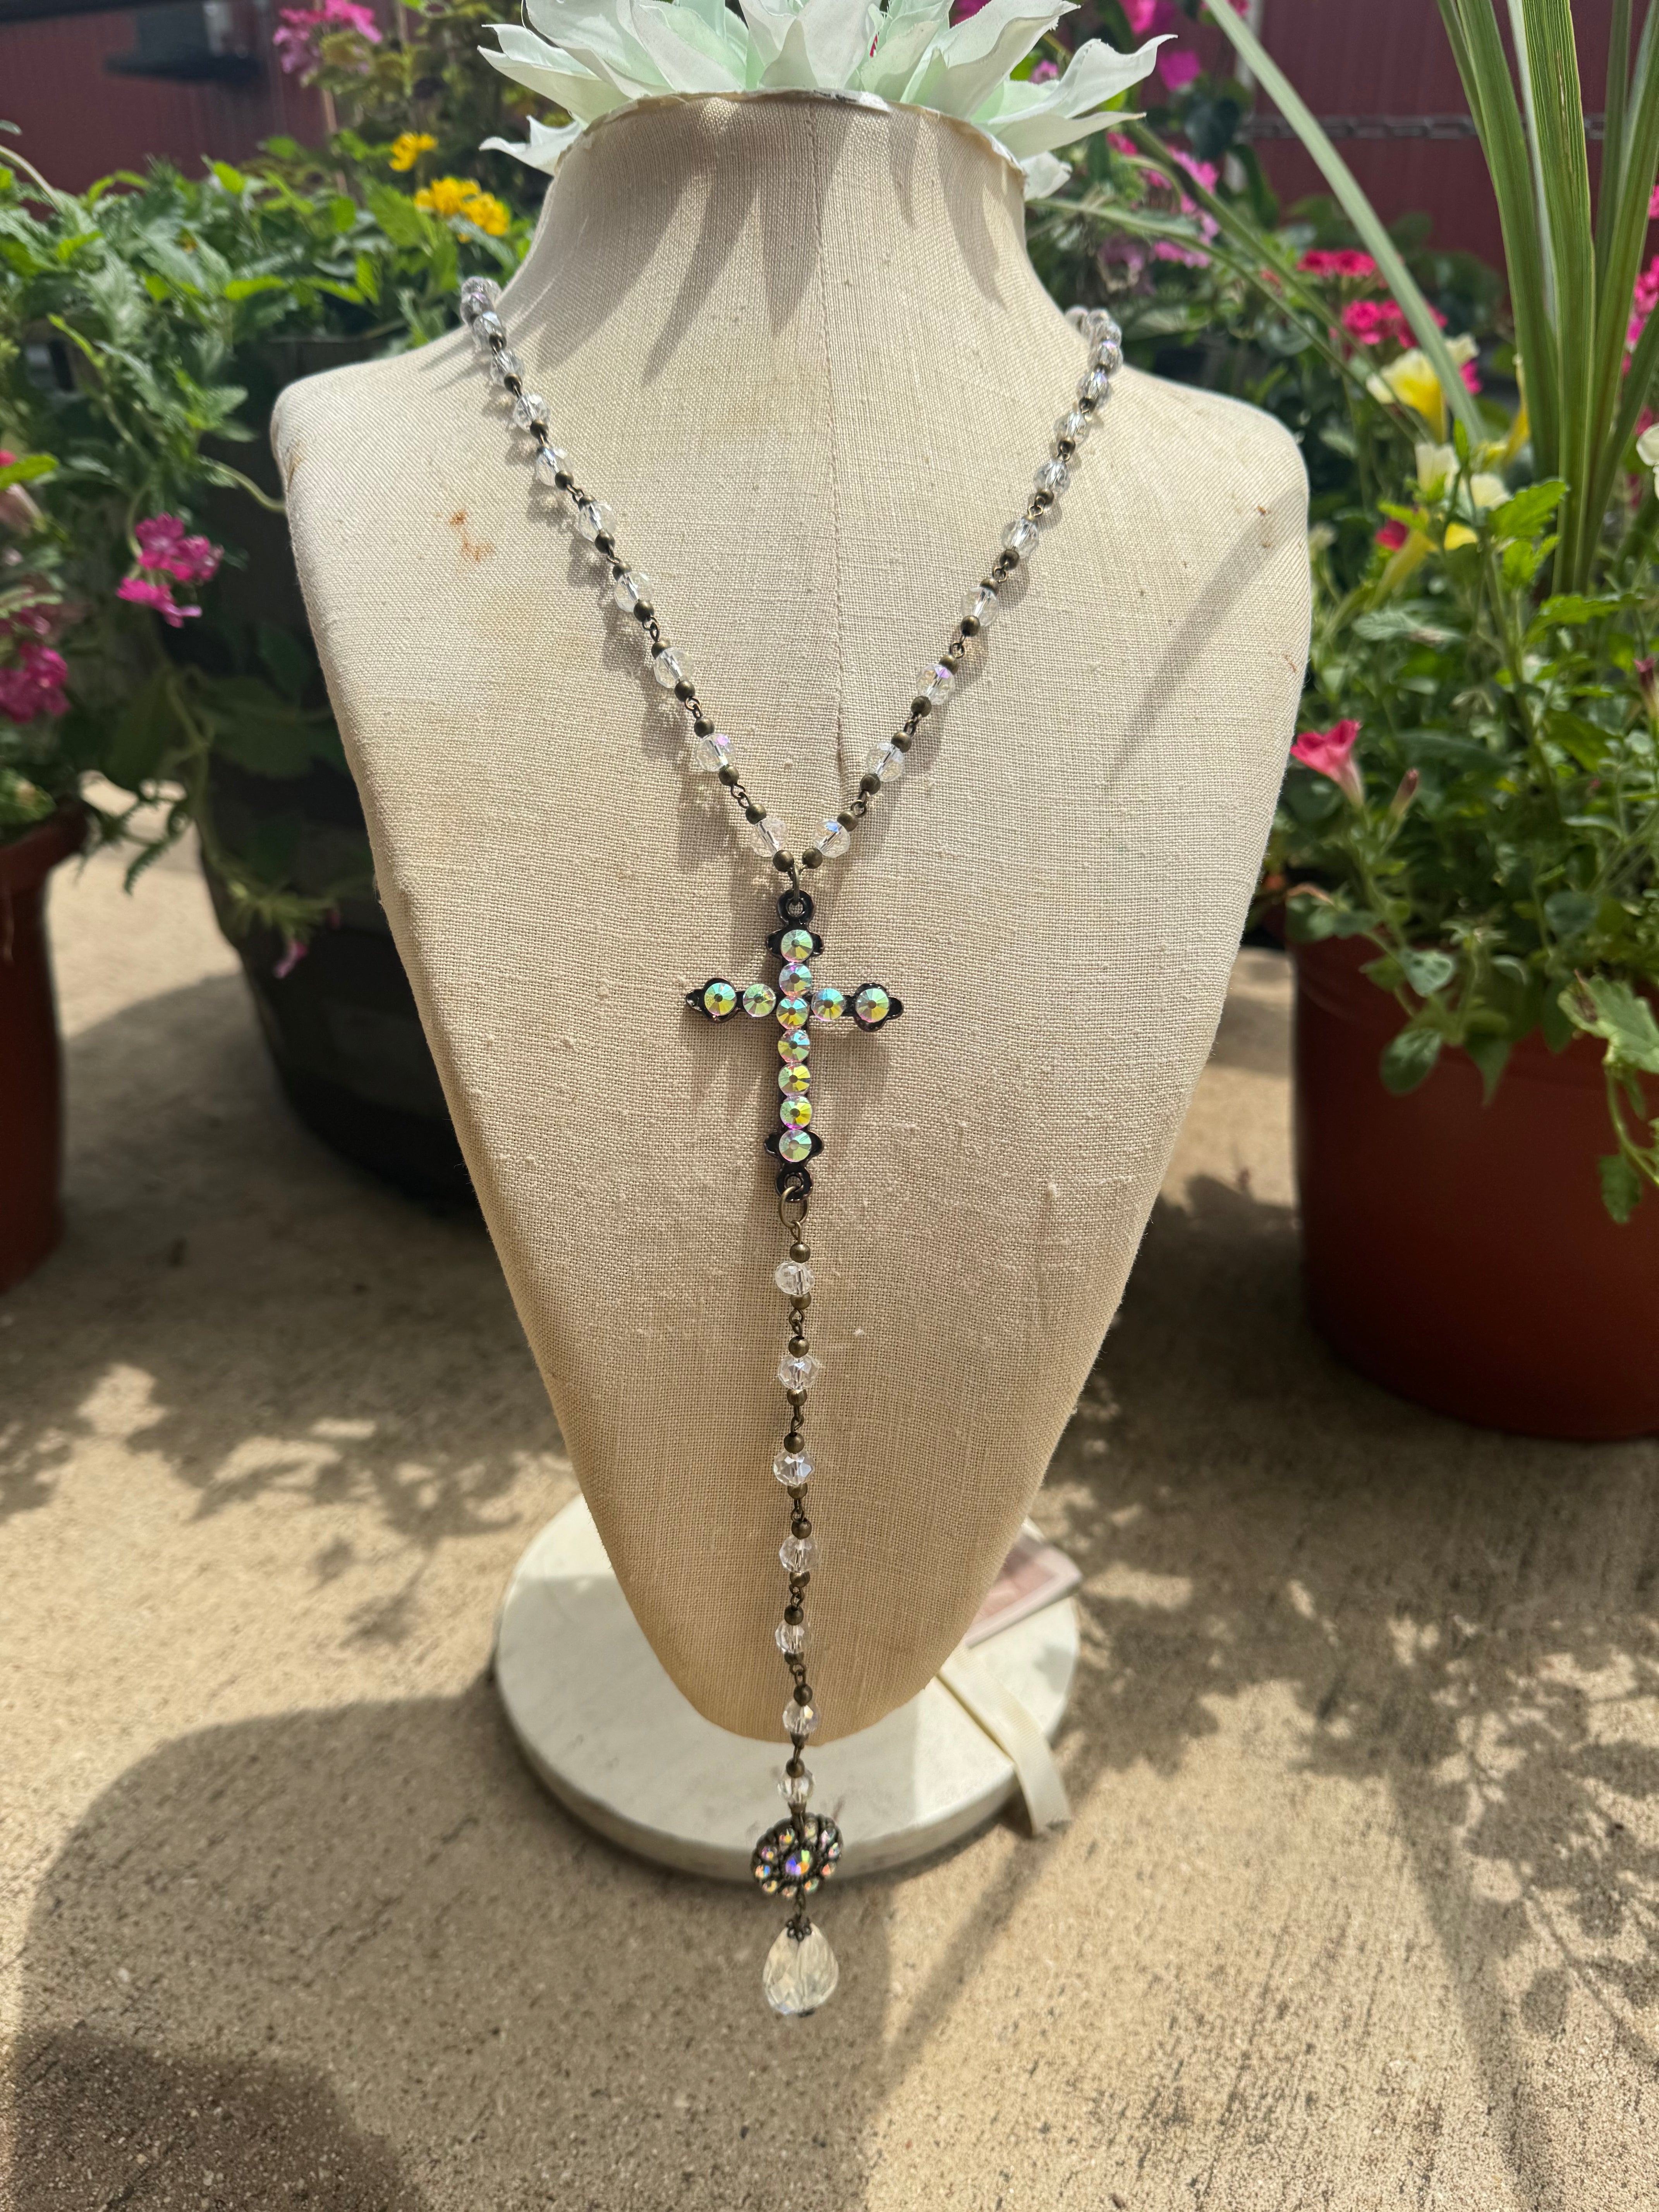 Clear Crystal Necklace (Cross)